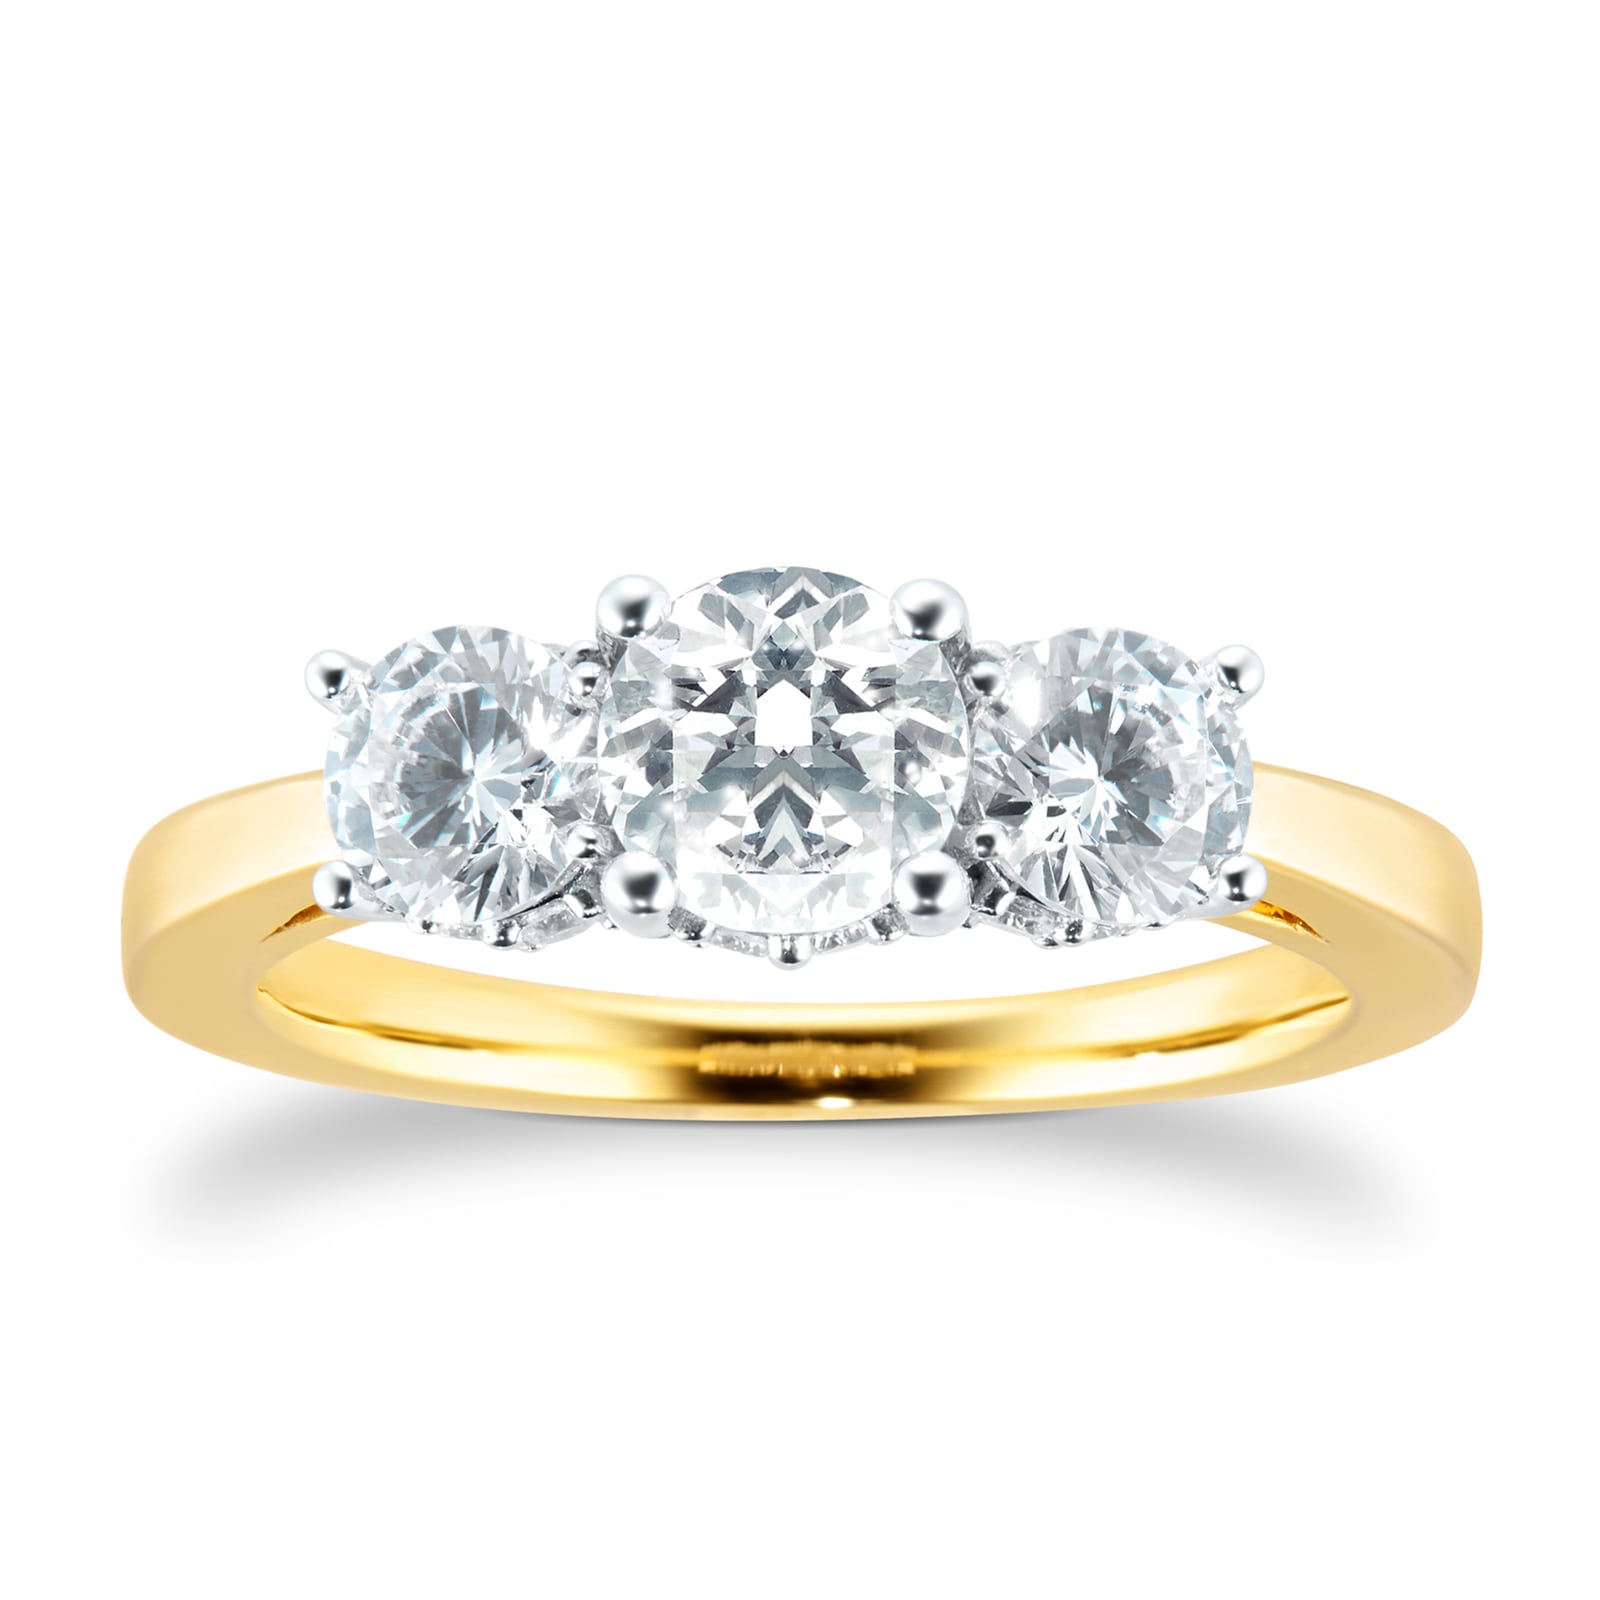 18ct Yellow Gold 1.50cttw Goldsmiths Brightest Diamond Three Stone Engagement Ring - Ring Size O